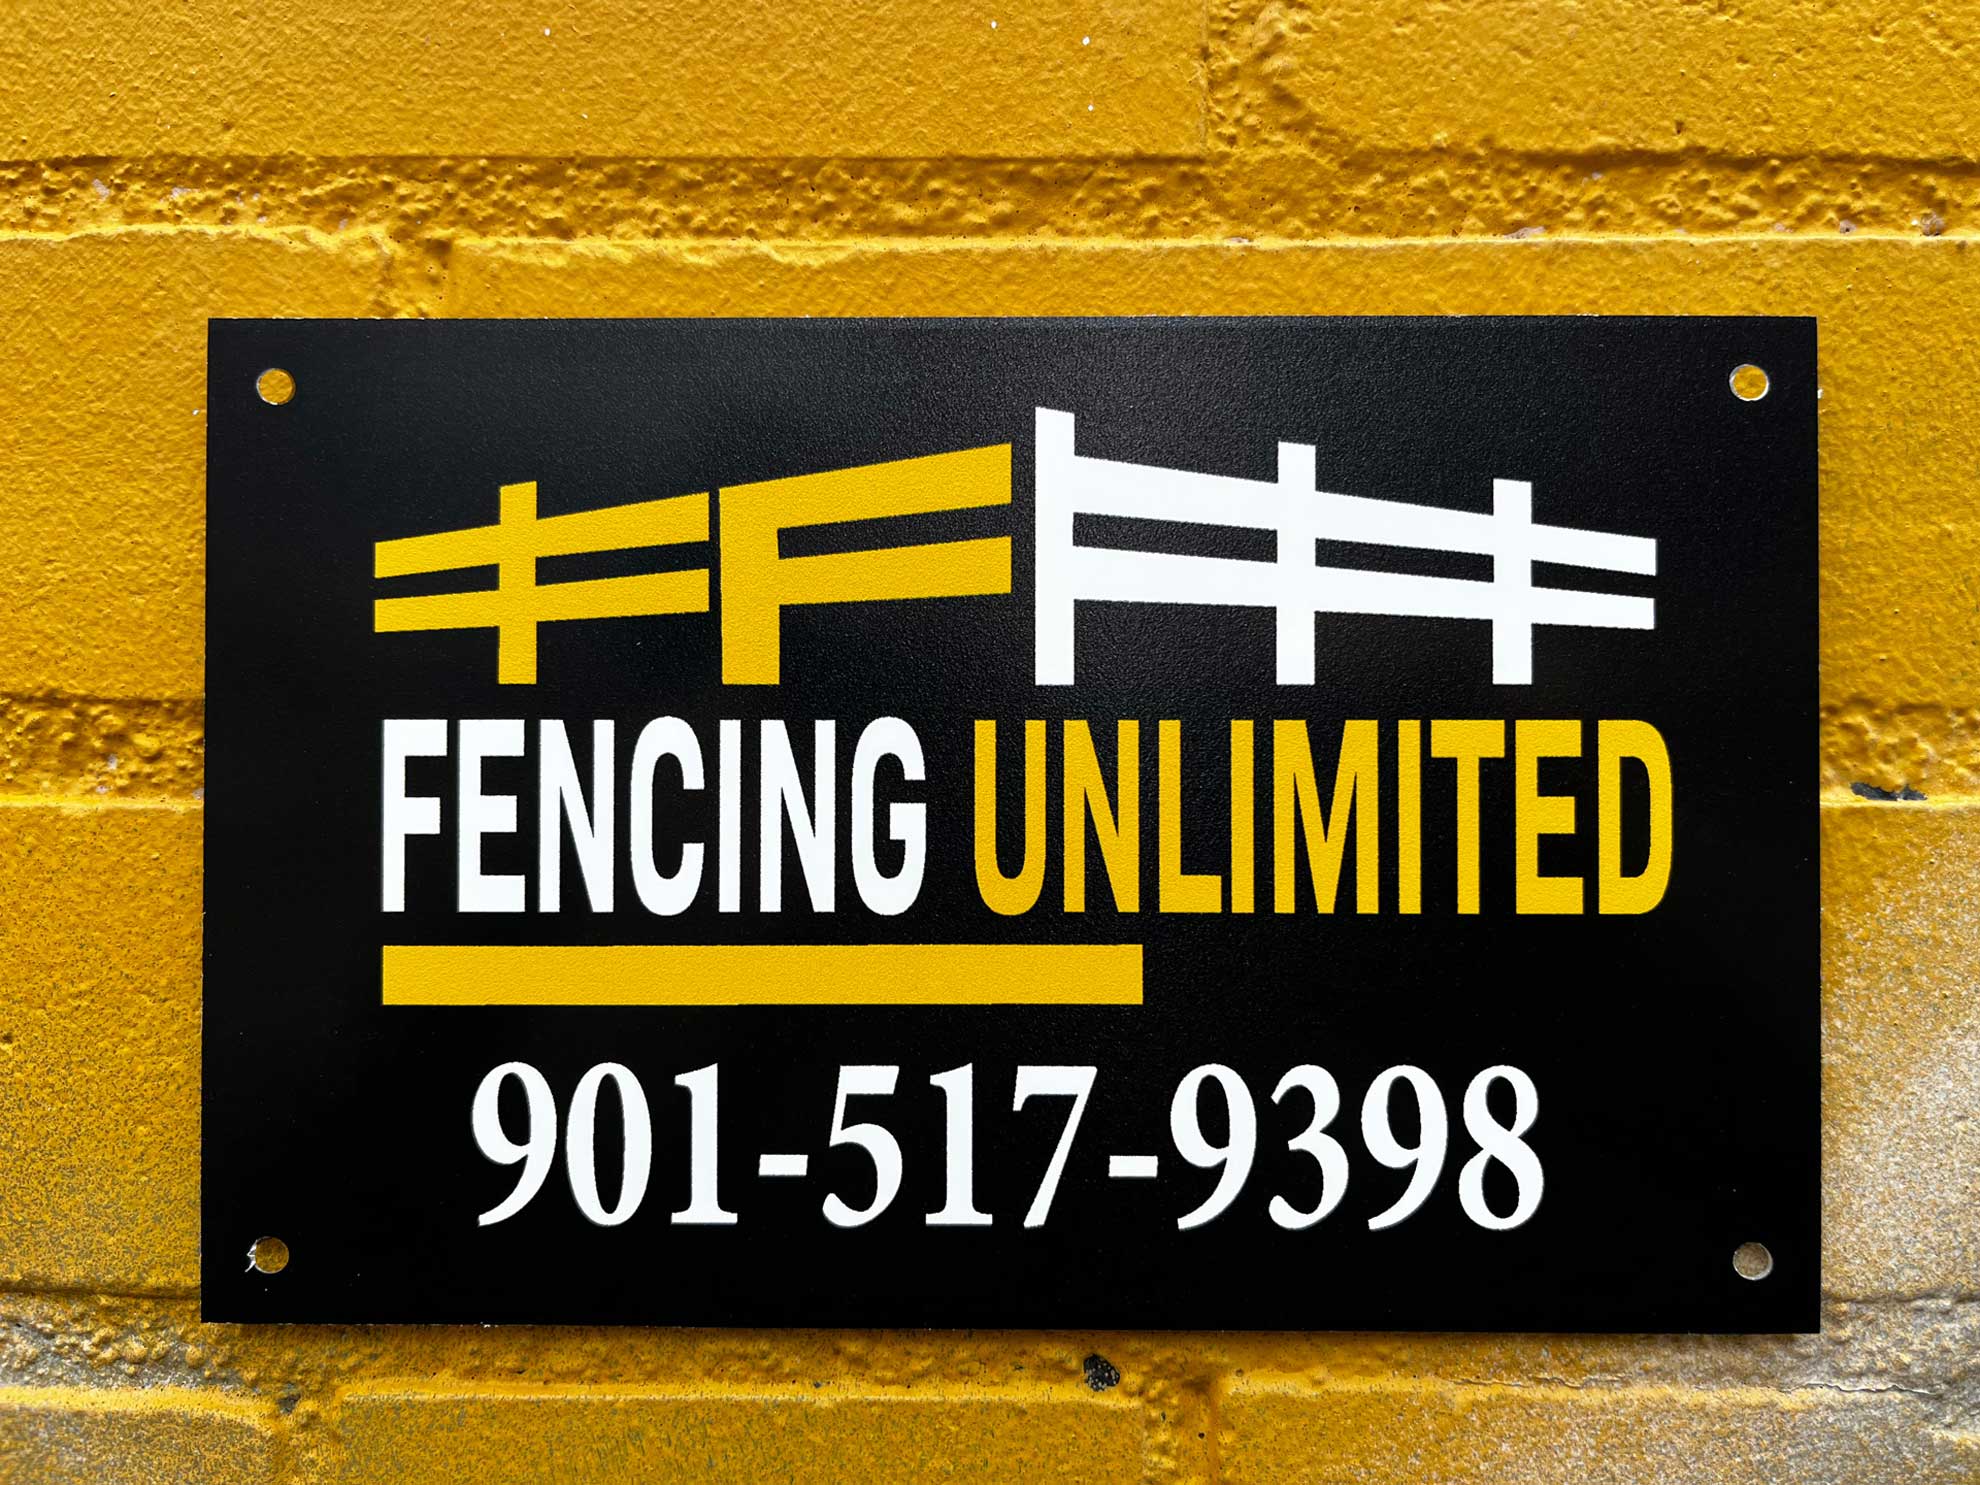 Fencing-Unlimited-fence-signs.jpg